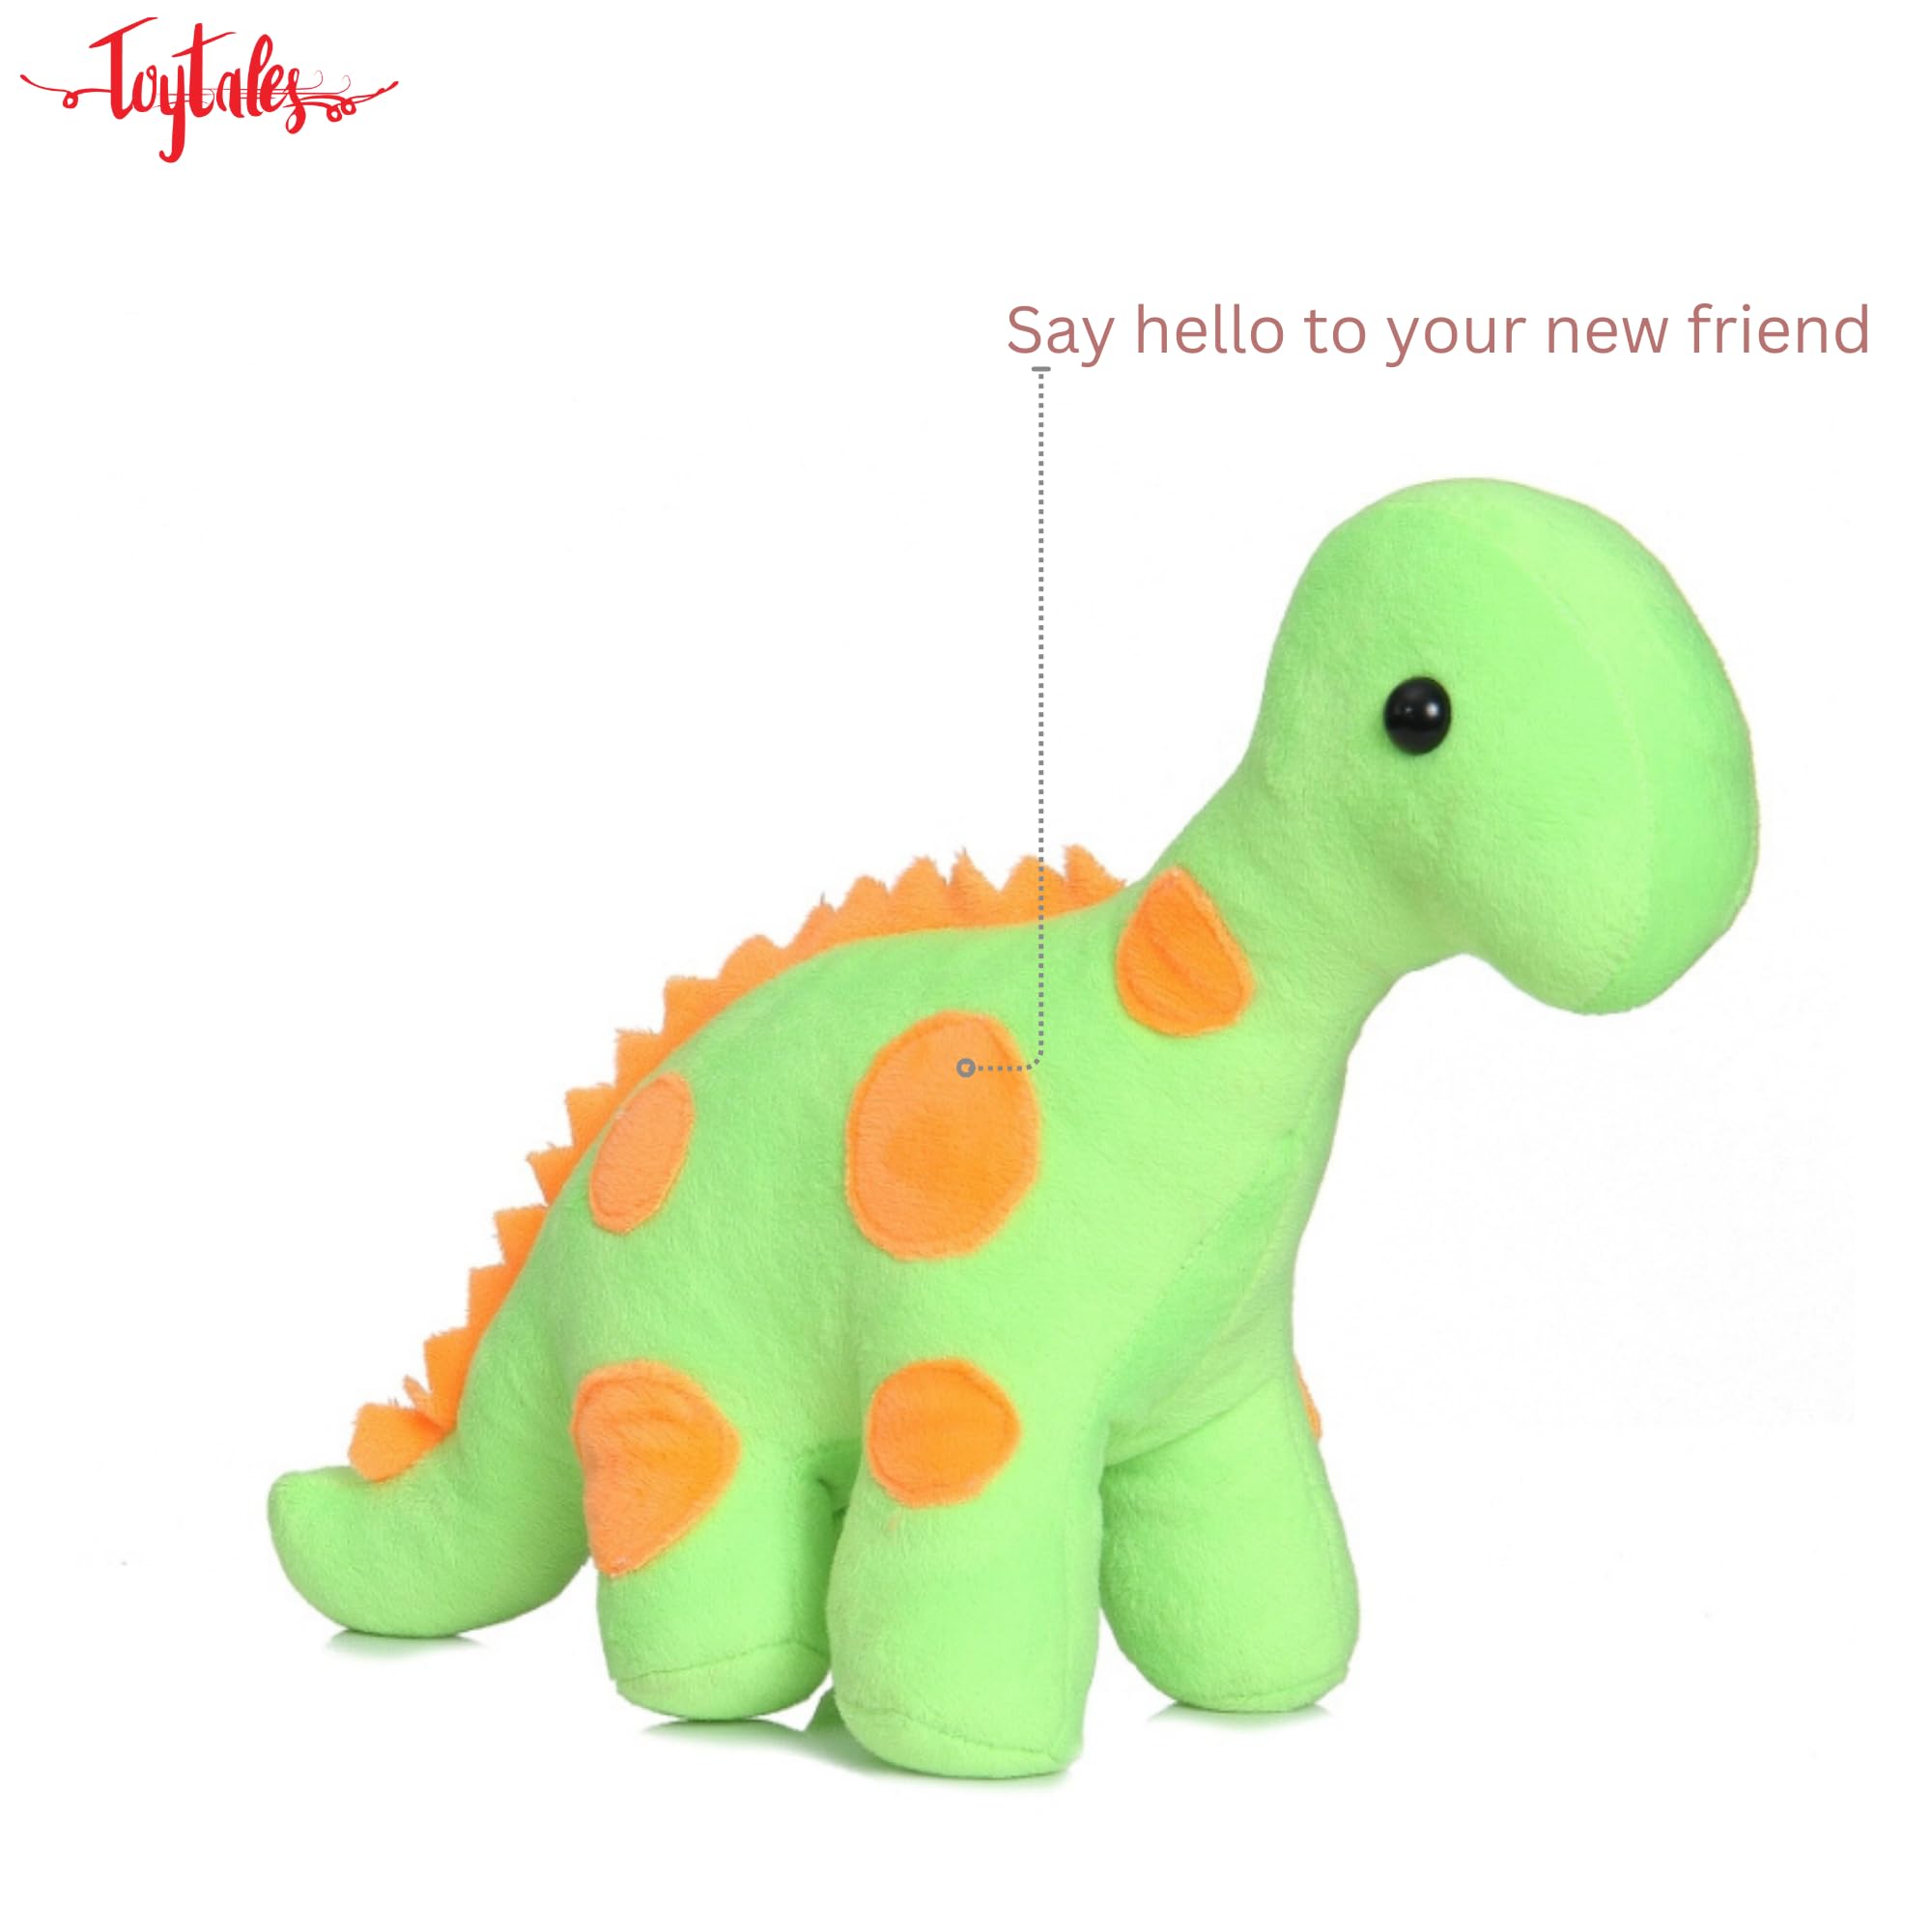 Cute Millo Cuddly Dinosaur, Stuffed Animal Soft Plush Toy for Baby, Snuggle Buddy for Kids Boy & Girl Best Huggable Toys for Babies, Kid Girls and Boys & Toddlers (Green, Mini Dino - 30 Cm)